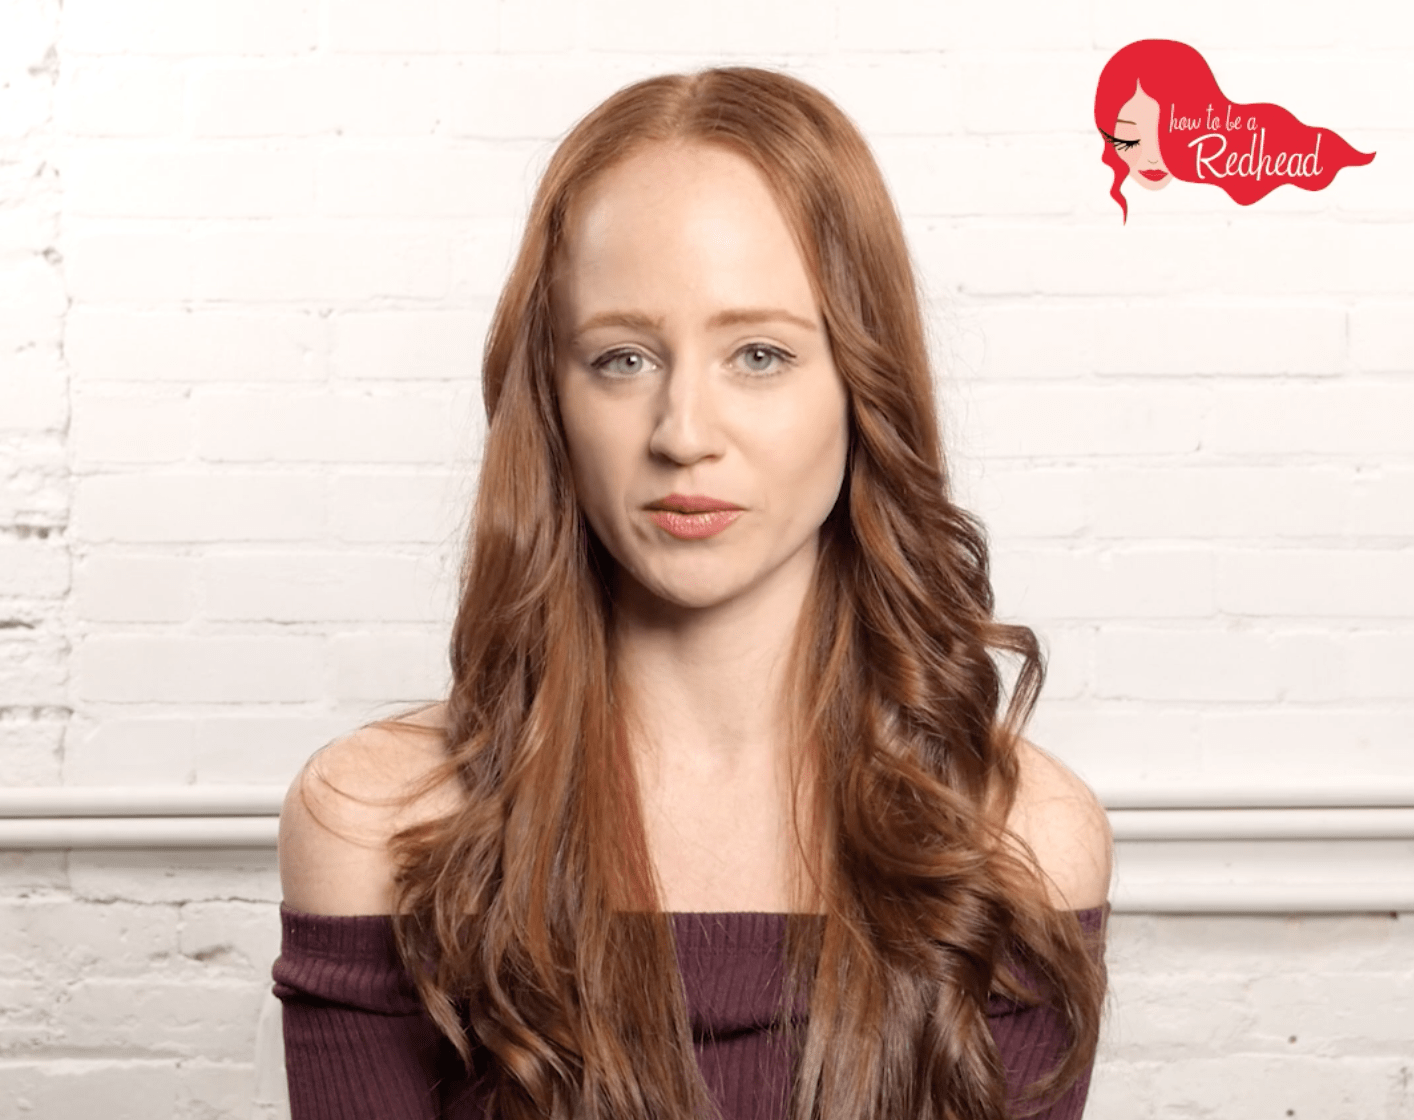 13 Fascinating Facts About Redheads Everyone Should Know